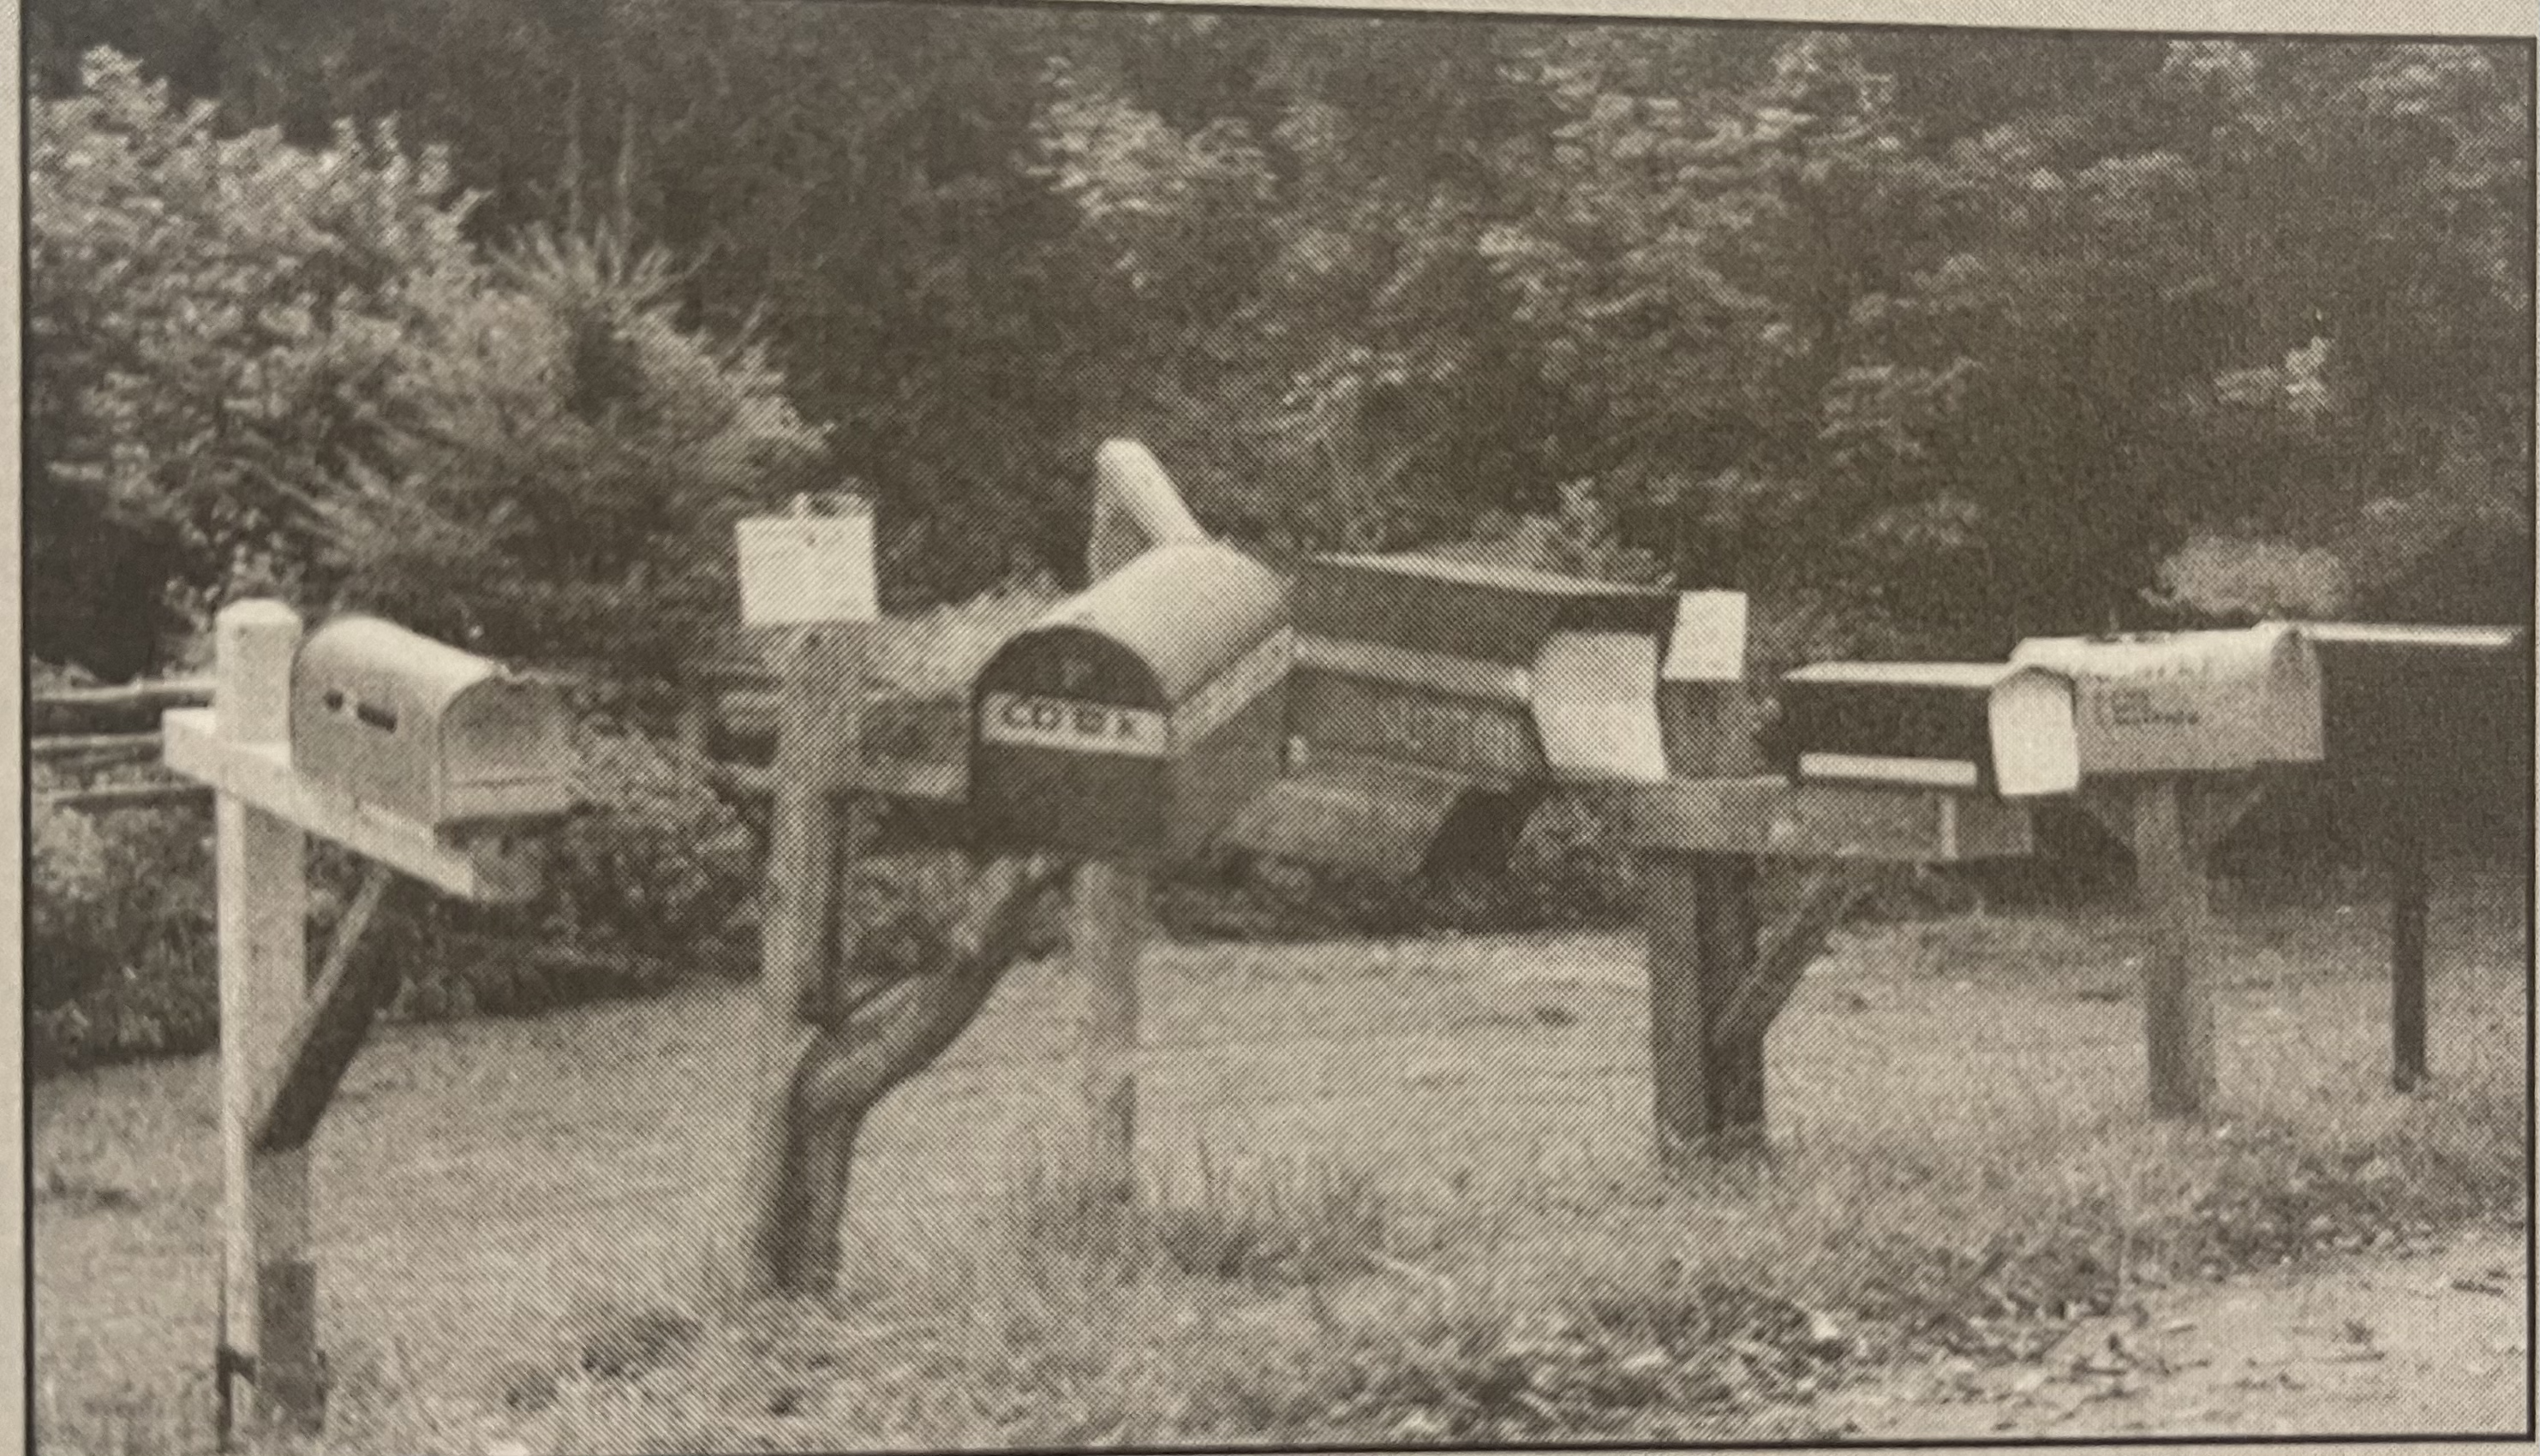 An old photograph of mailboxes lining the side of a road.